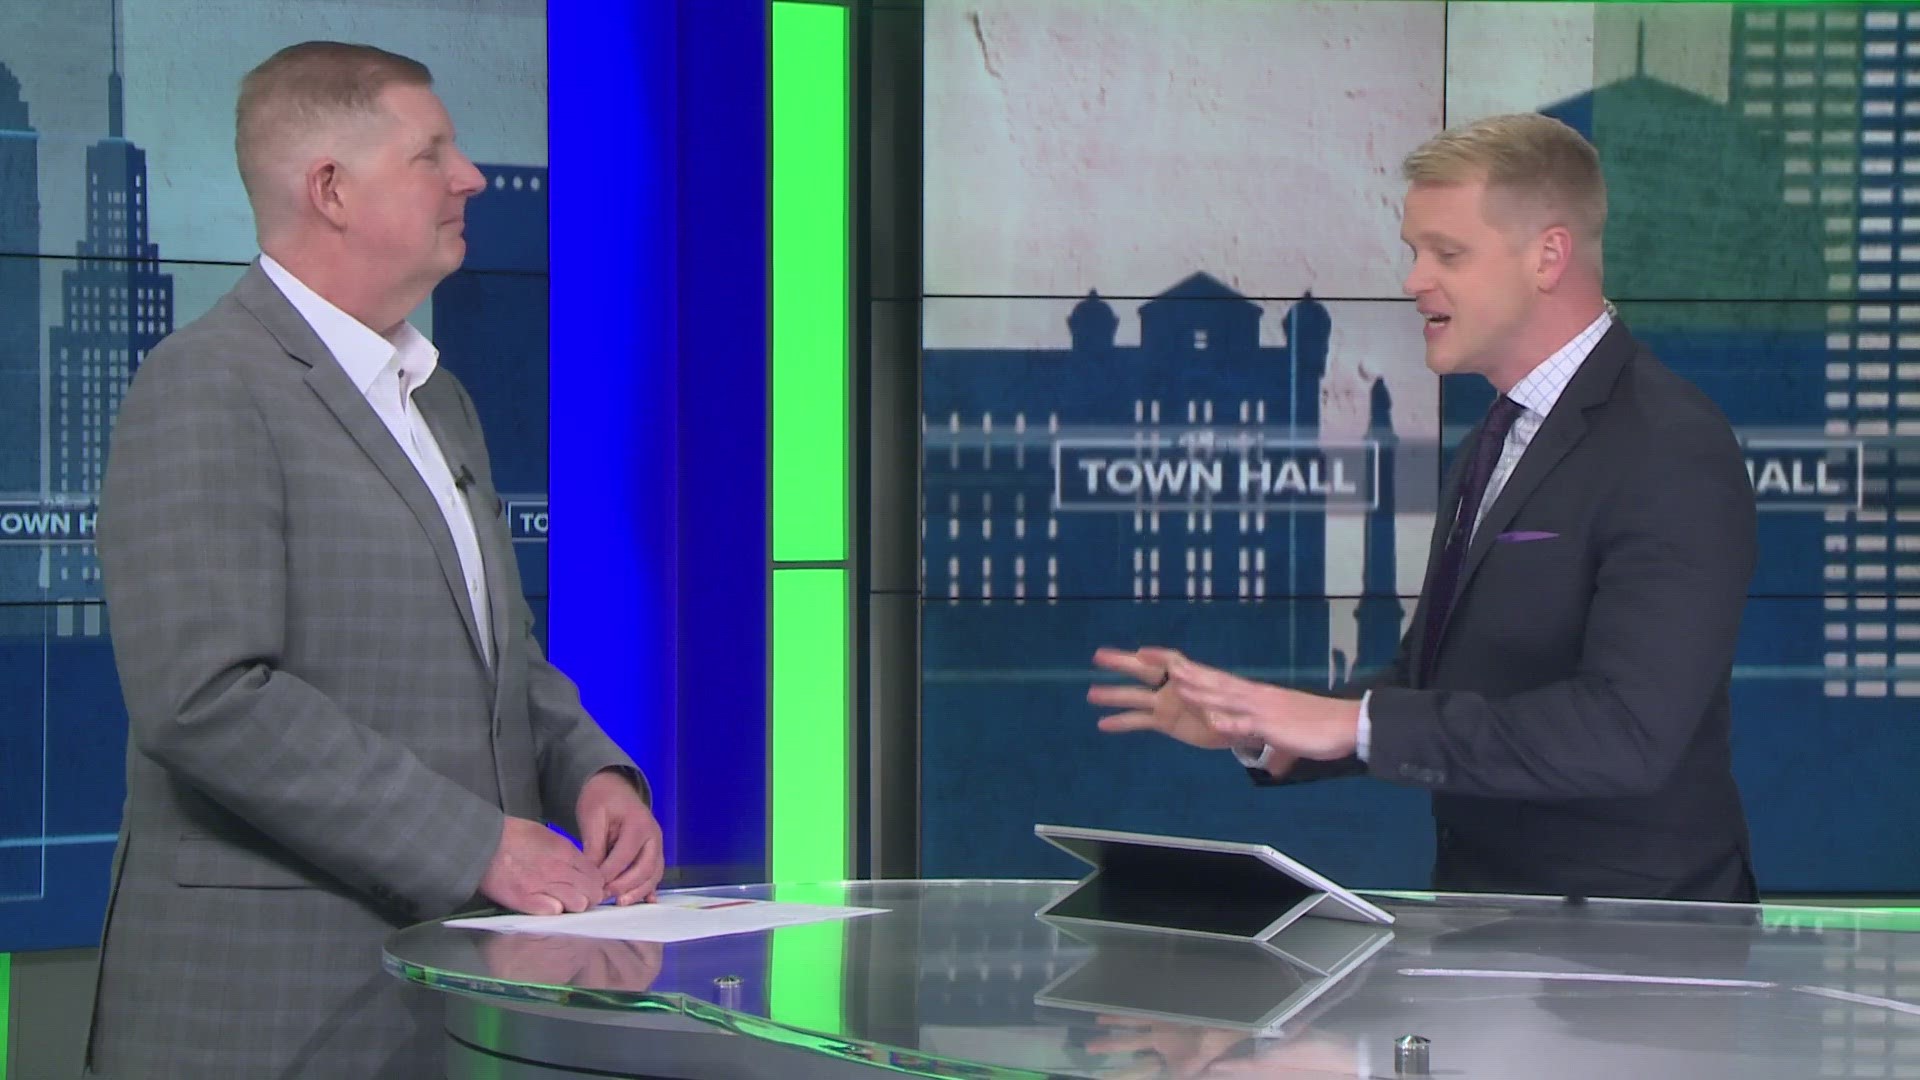 Patrick Kaler, the president and CEO of Visit Buffalo Niagara, joins our Town Hall to discuss what a bed tax would mean for Western New York communities.